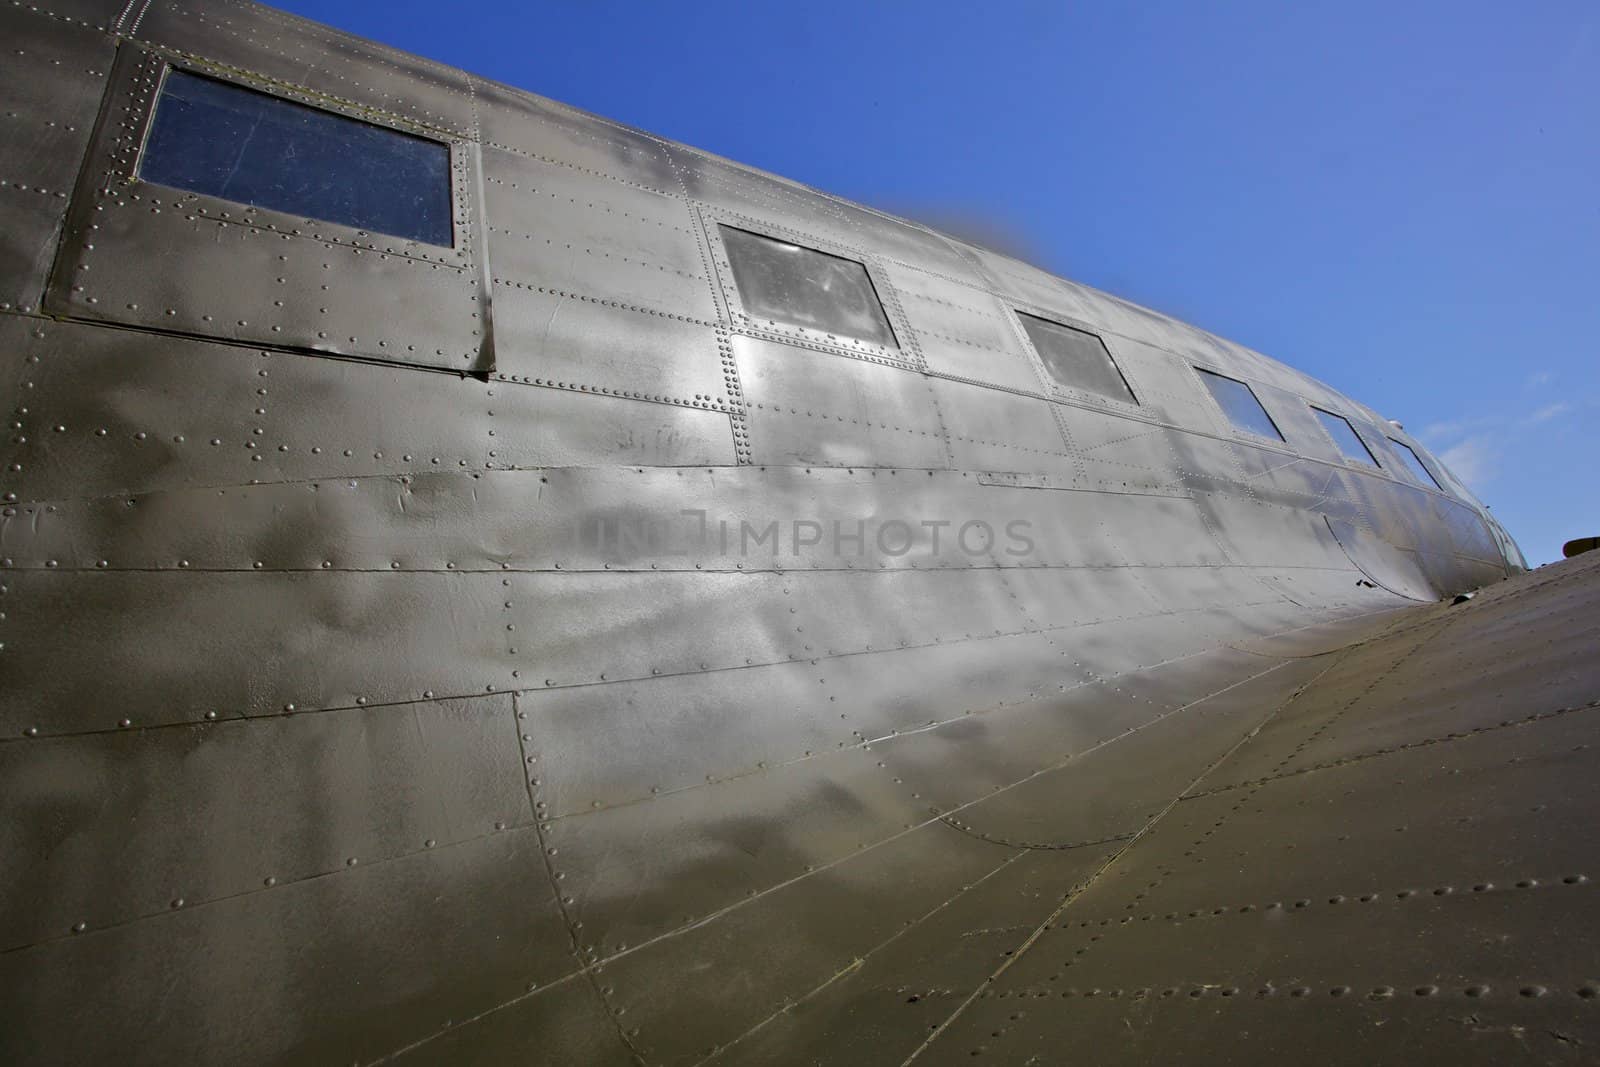 WW II transport airplane, the C-47 showing dramatic contours with blue sky background